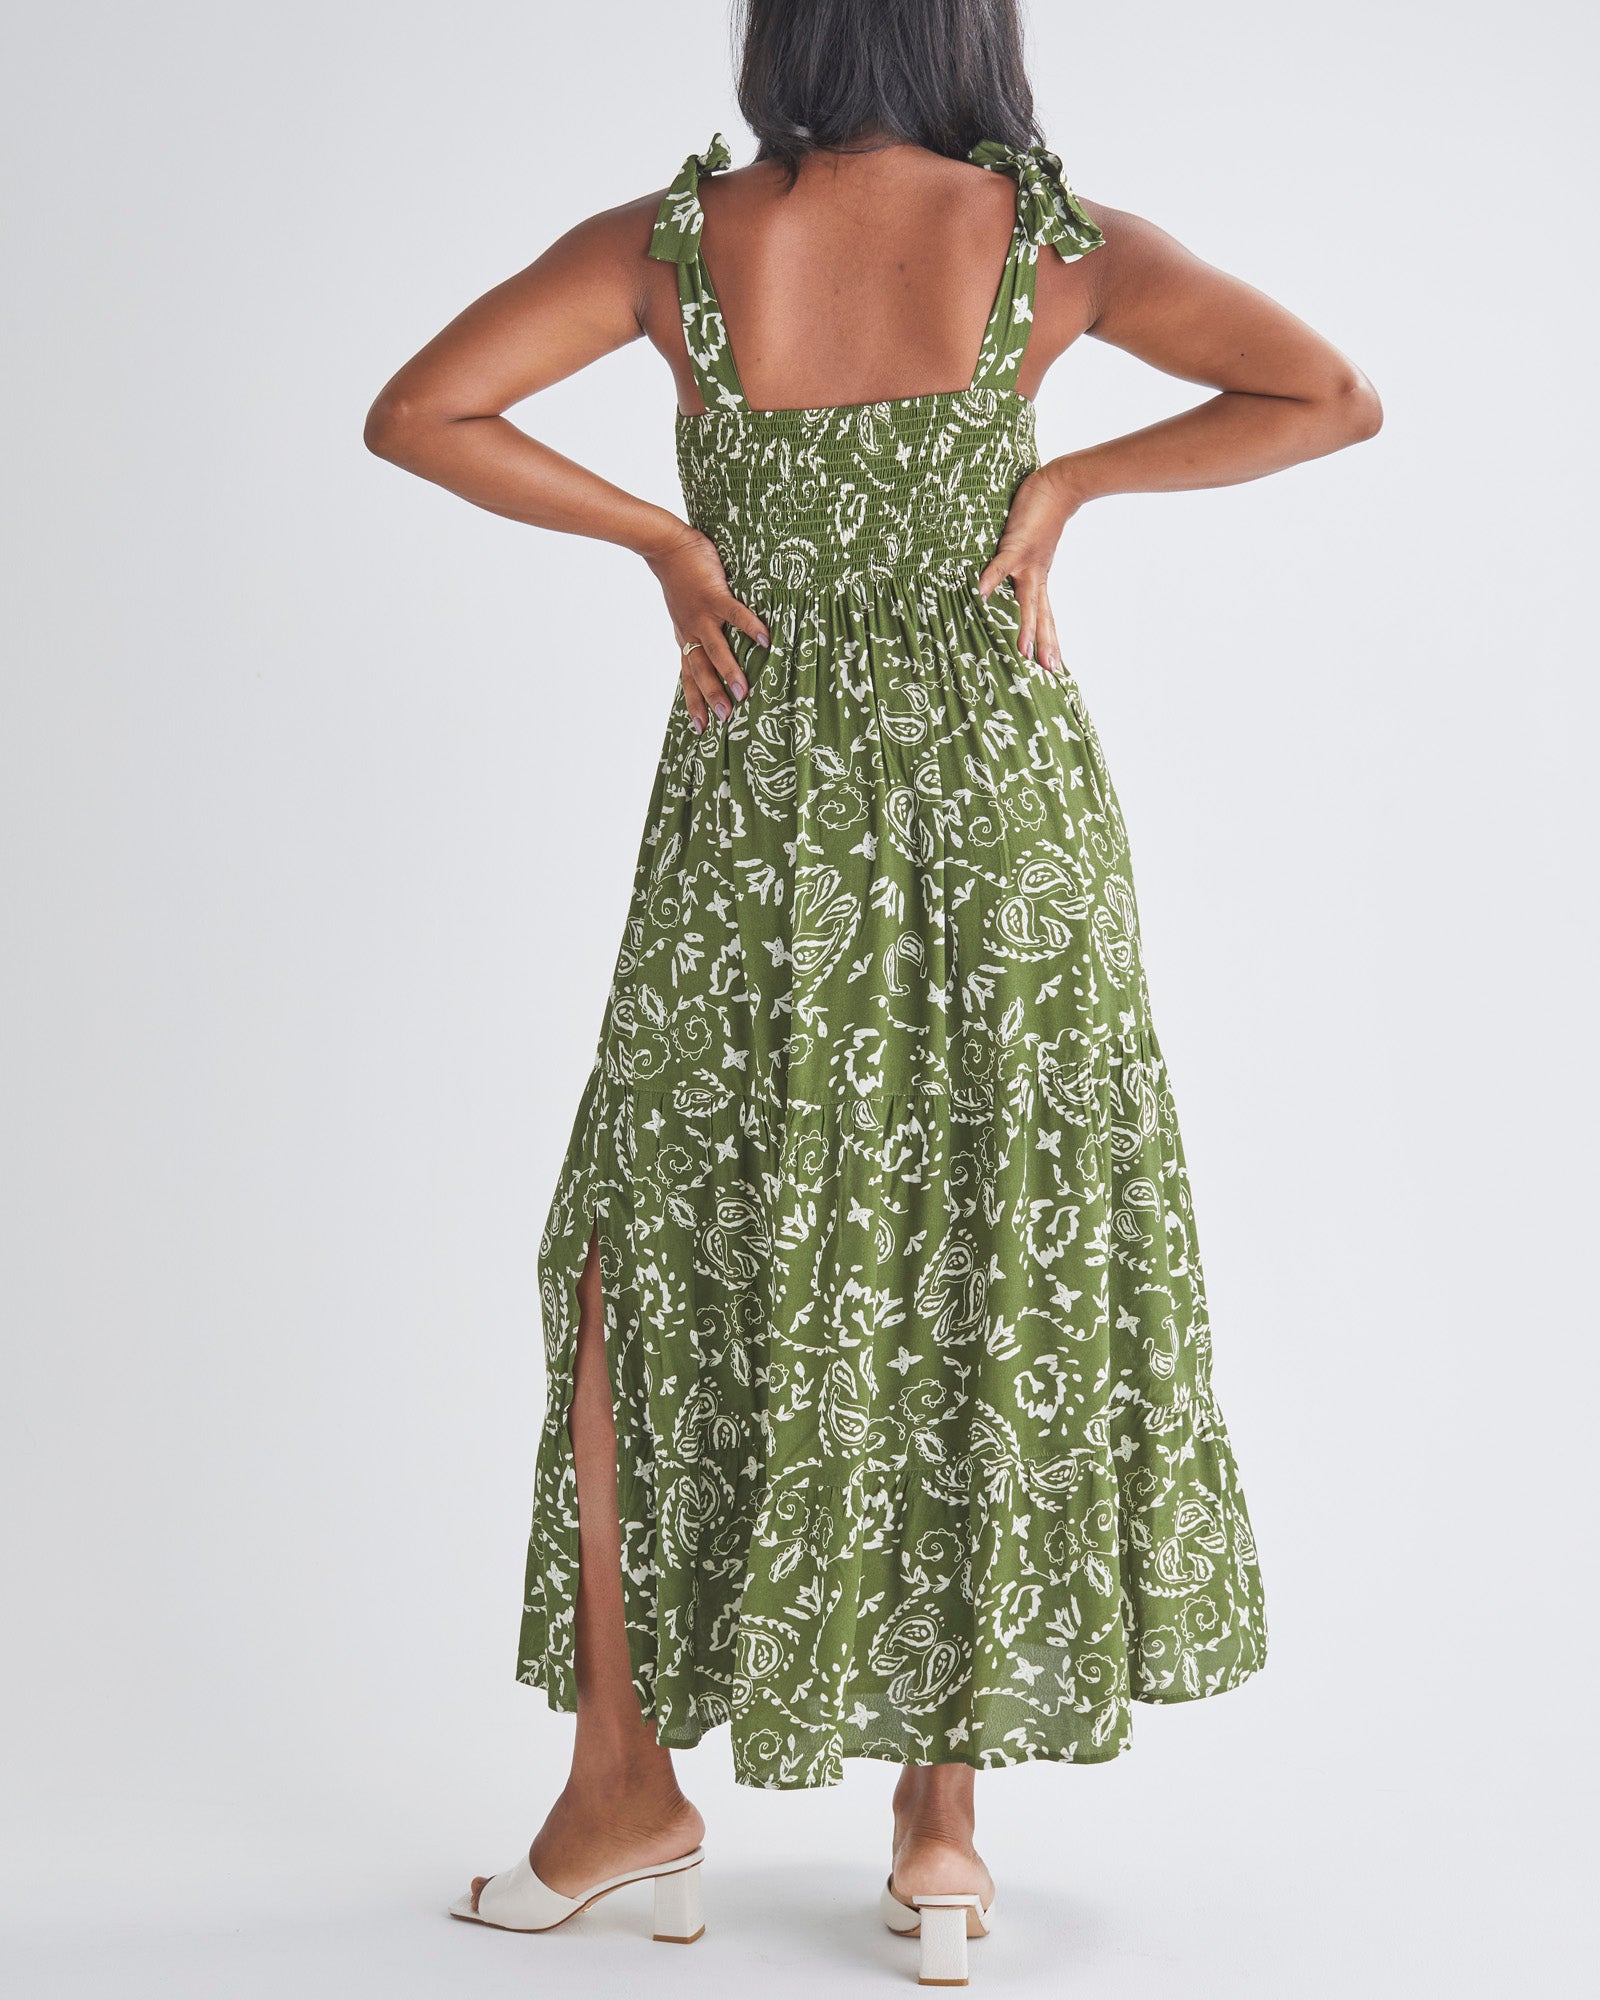 Back View - A Pregnant Woman Wearing Lilliana Maternity Green Dress in Paisley Print from Angel Maternity